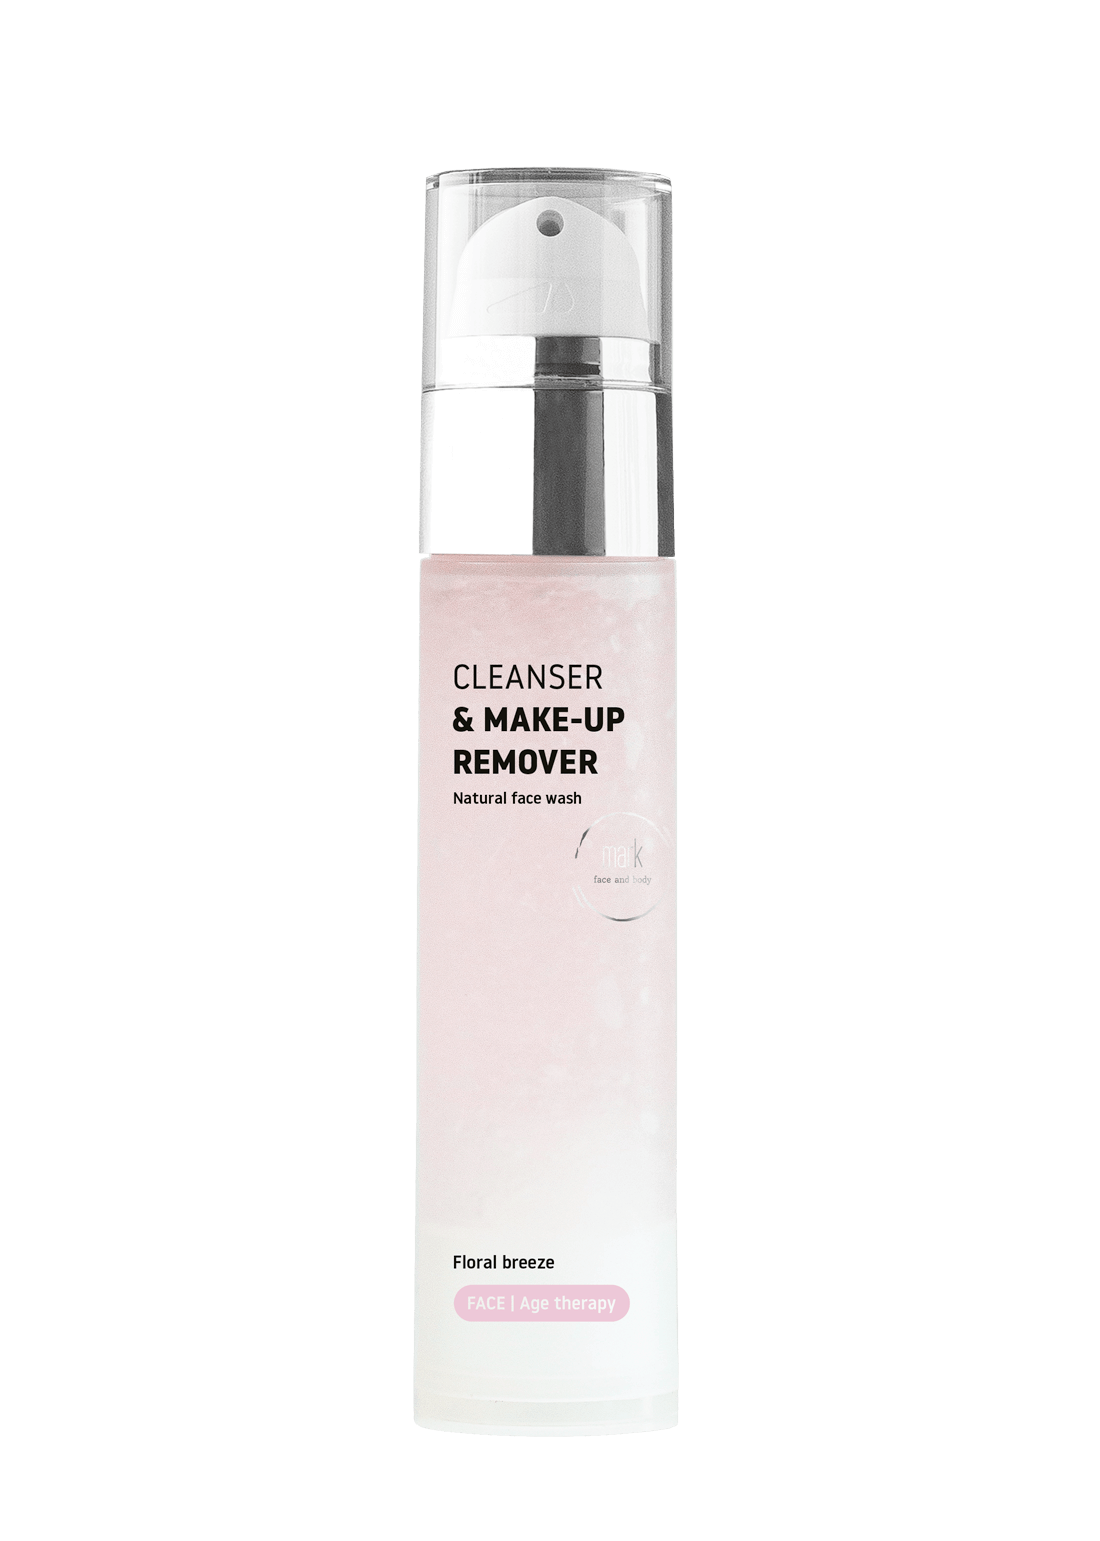 MARK cleanser & make-up remover / Age therapy